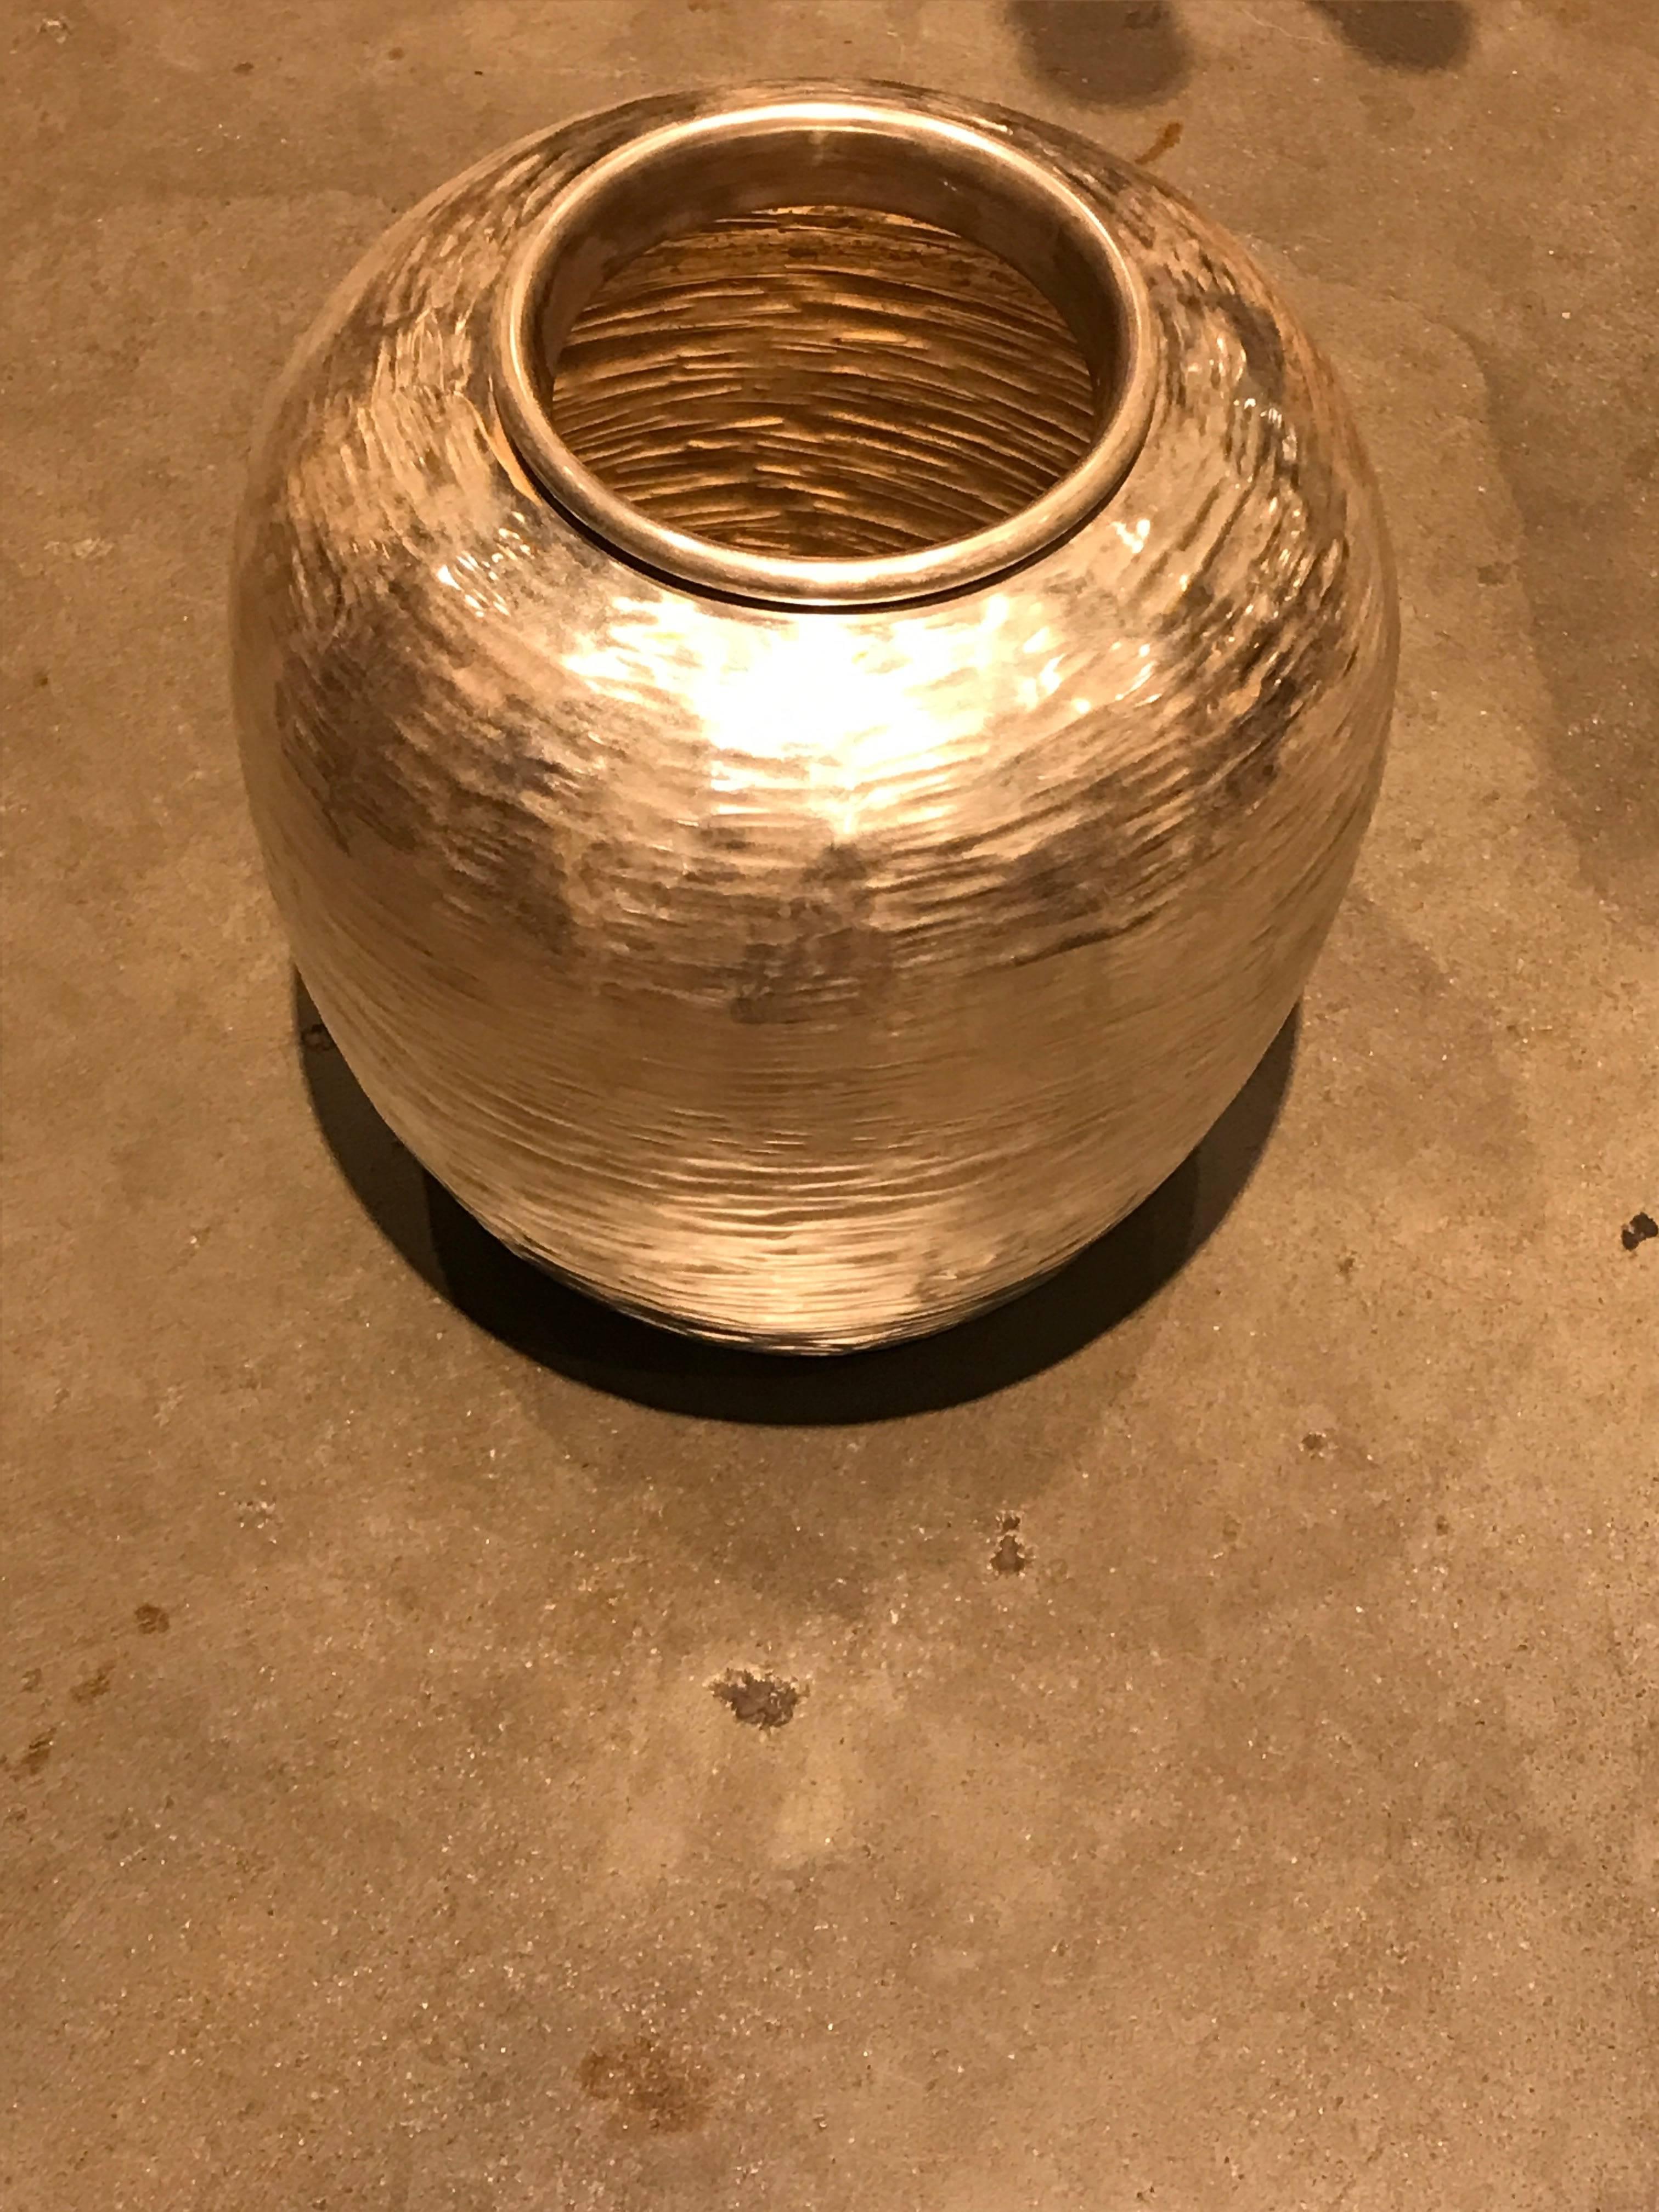 Silver plated Gucci vase from the 1970s, repousse surface.